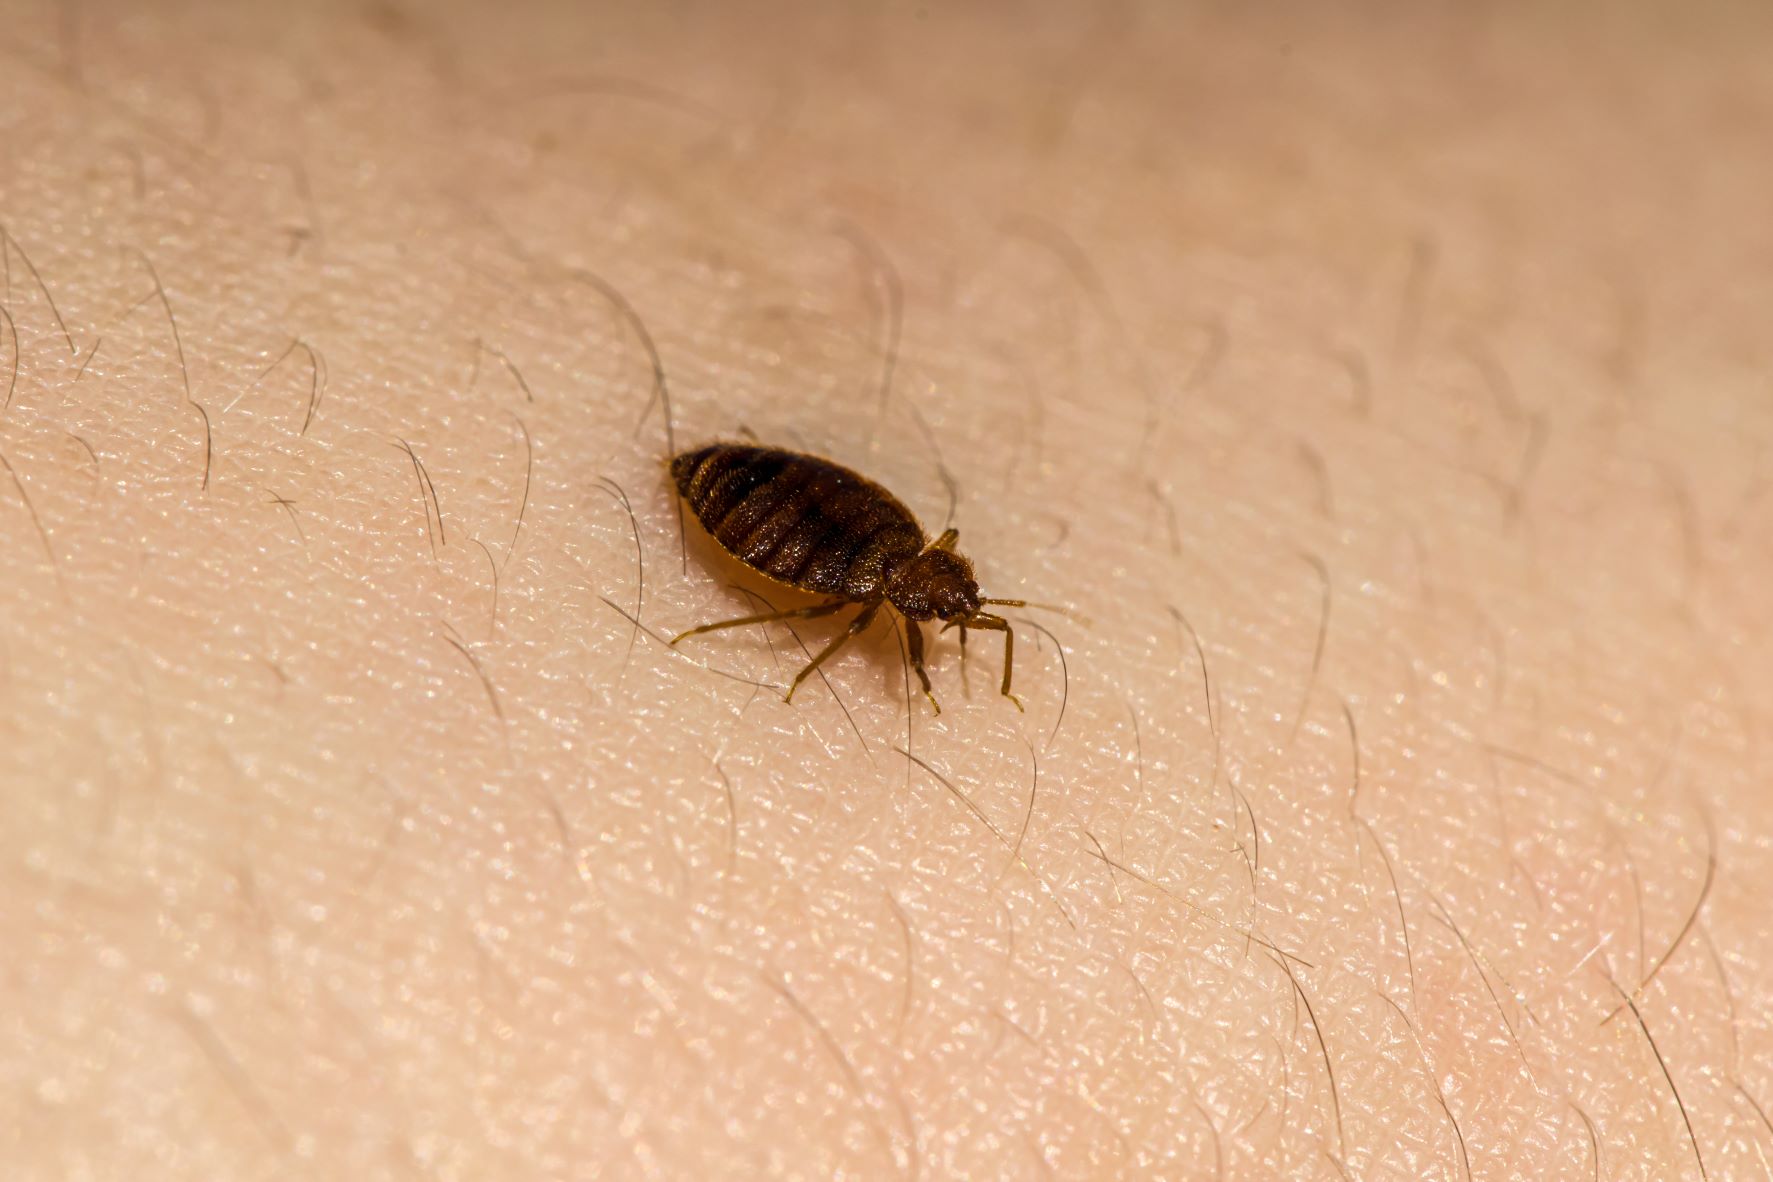 Bed bug standing on skin surrounded by hair